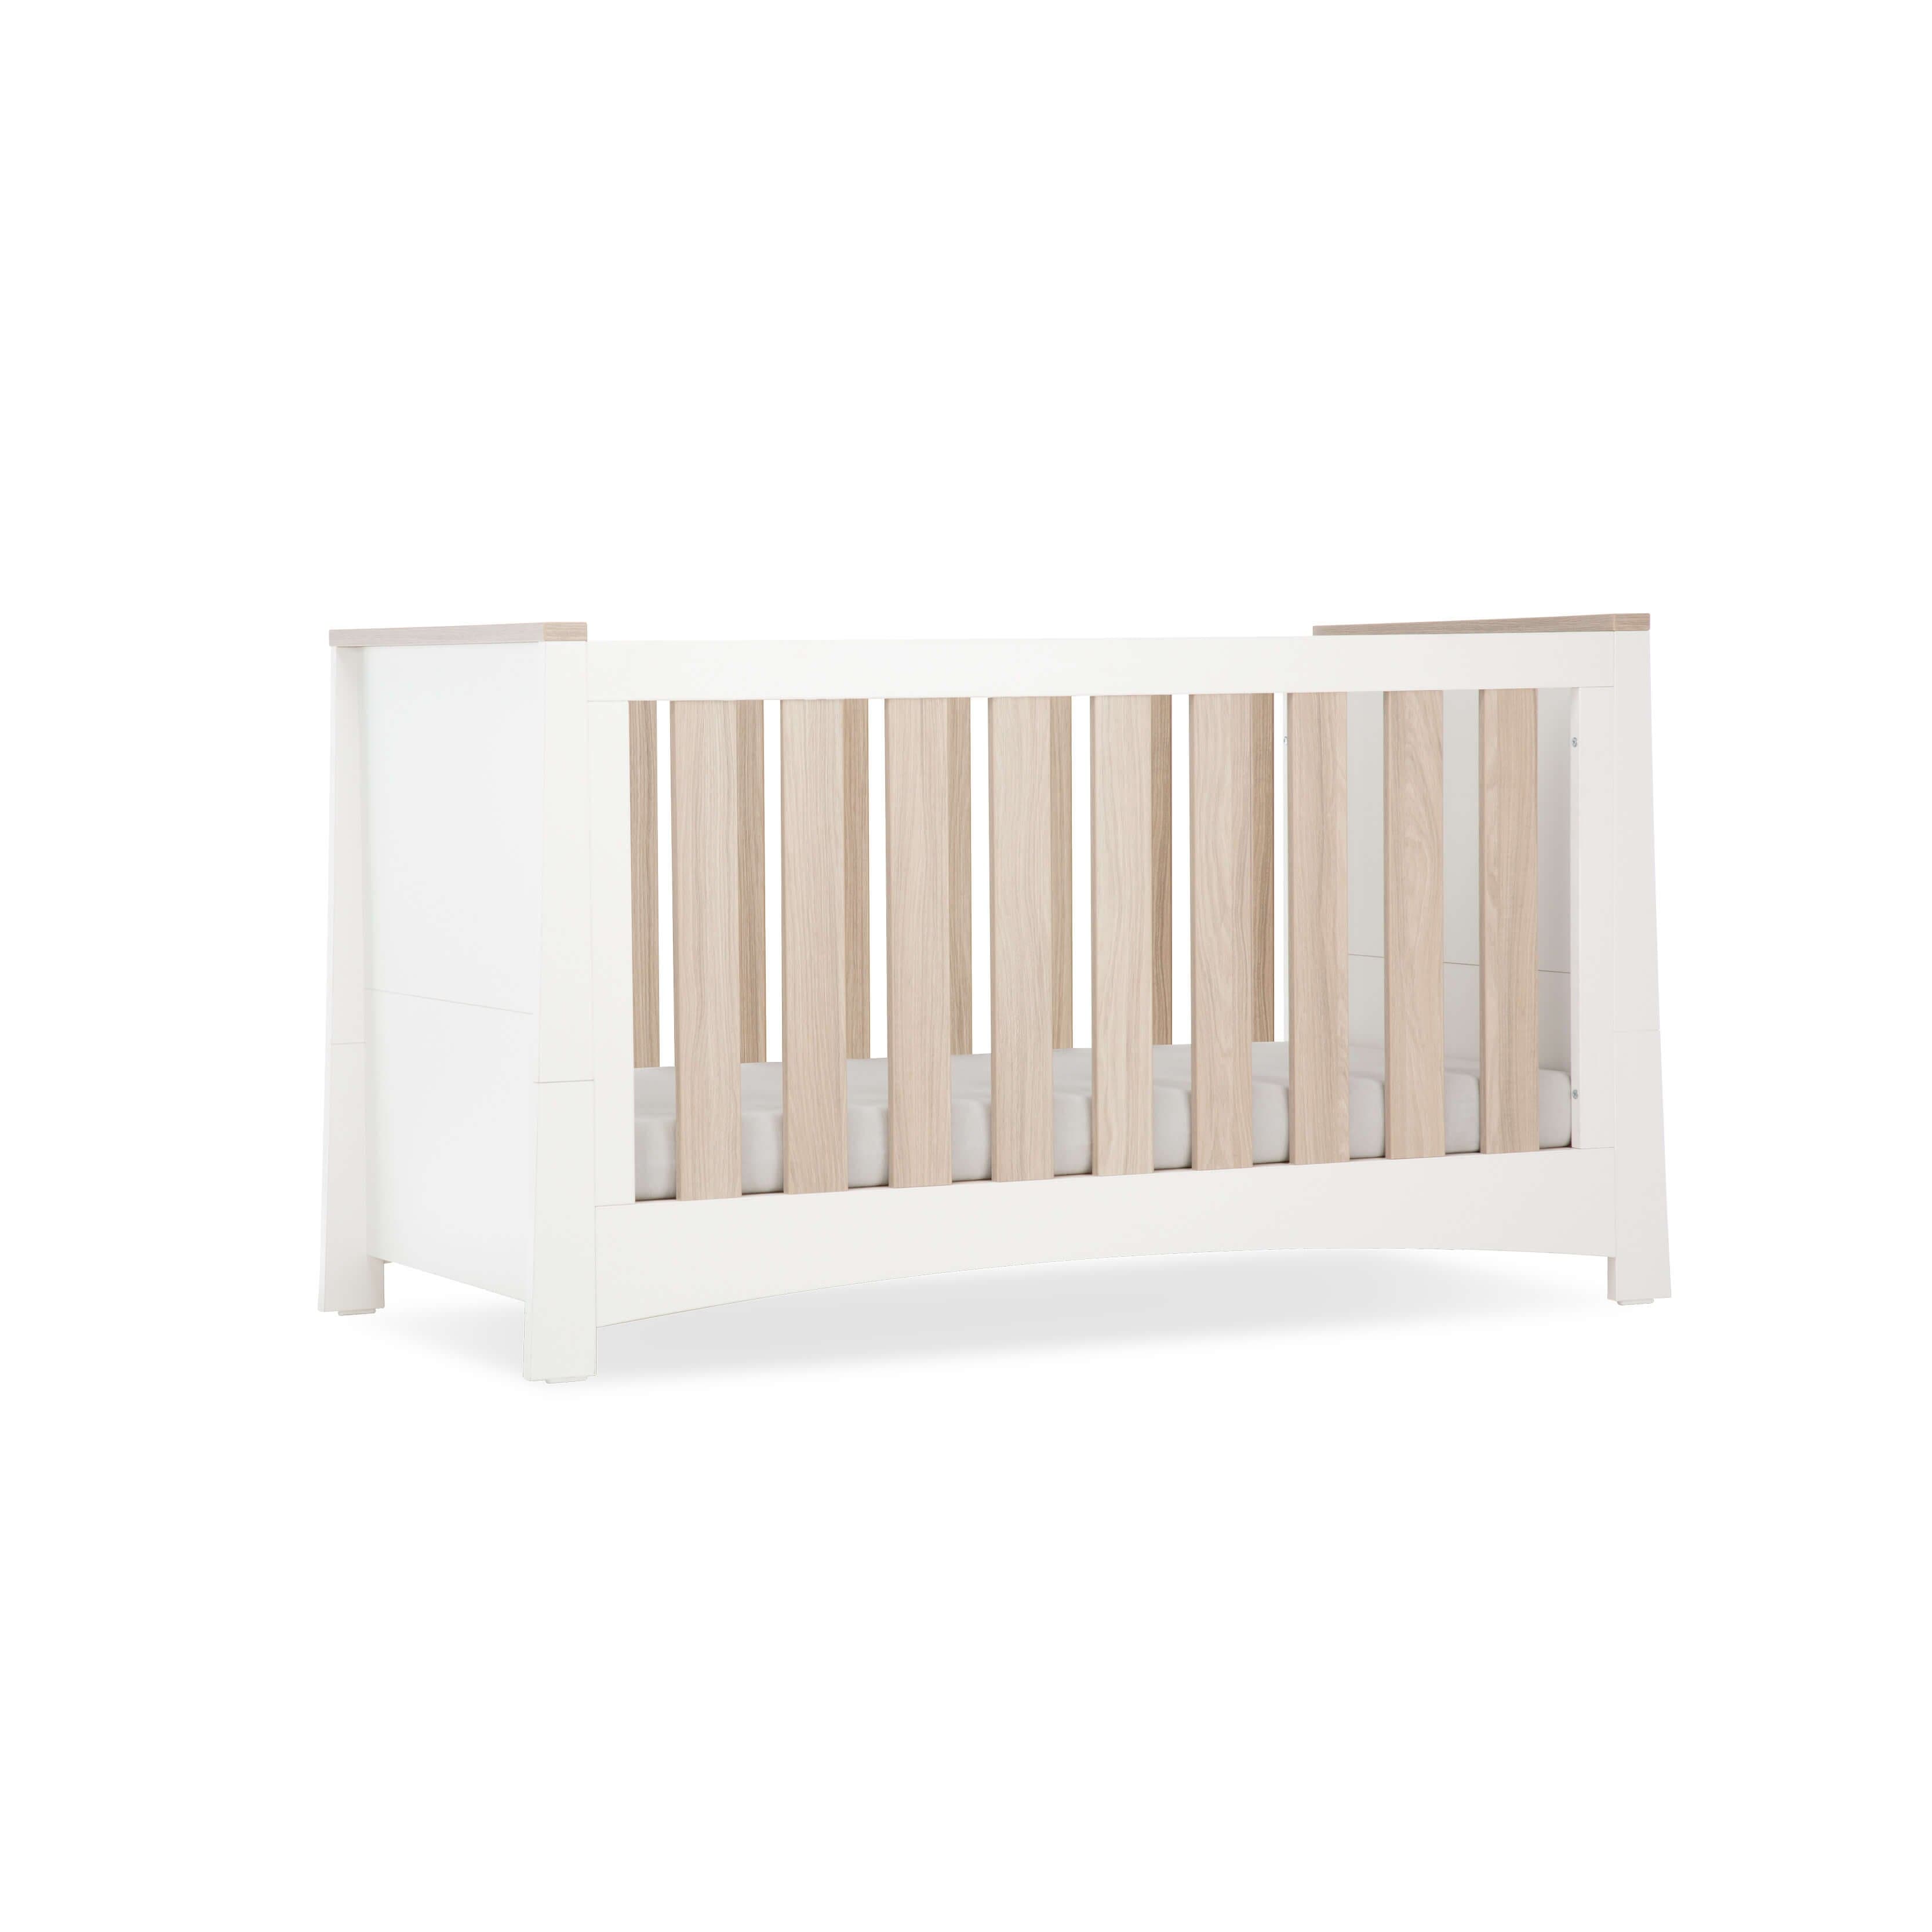 Cuddleco Ada 2 Piece Nursery Furniture Set - White & Ash -  | For Your Little One